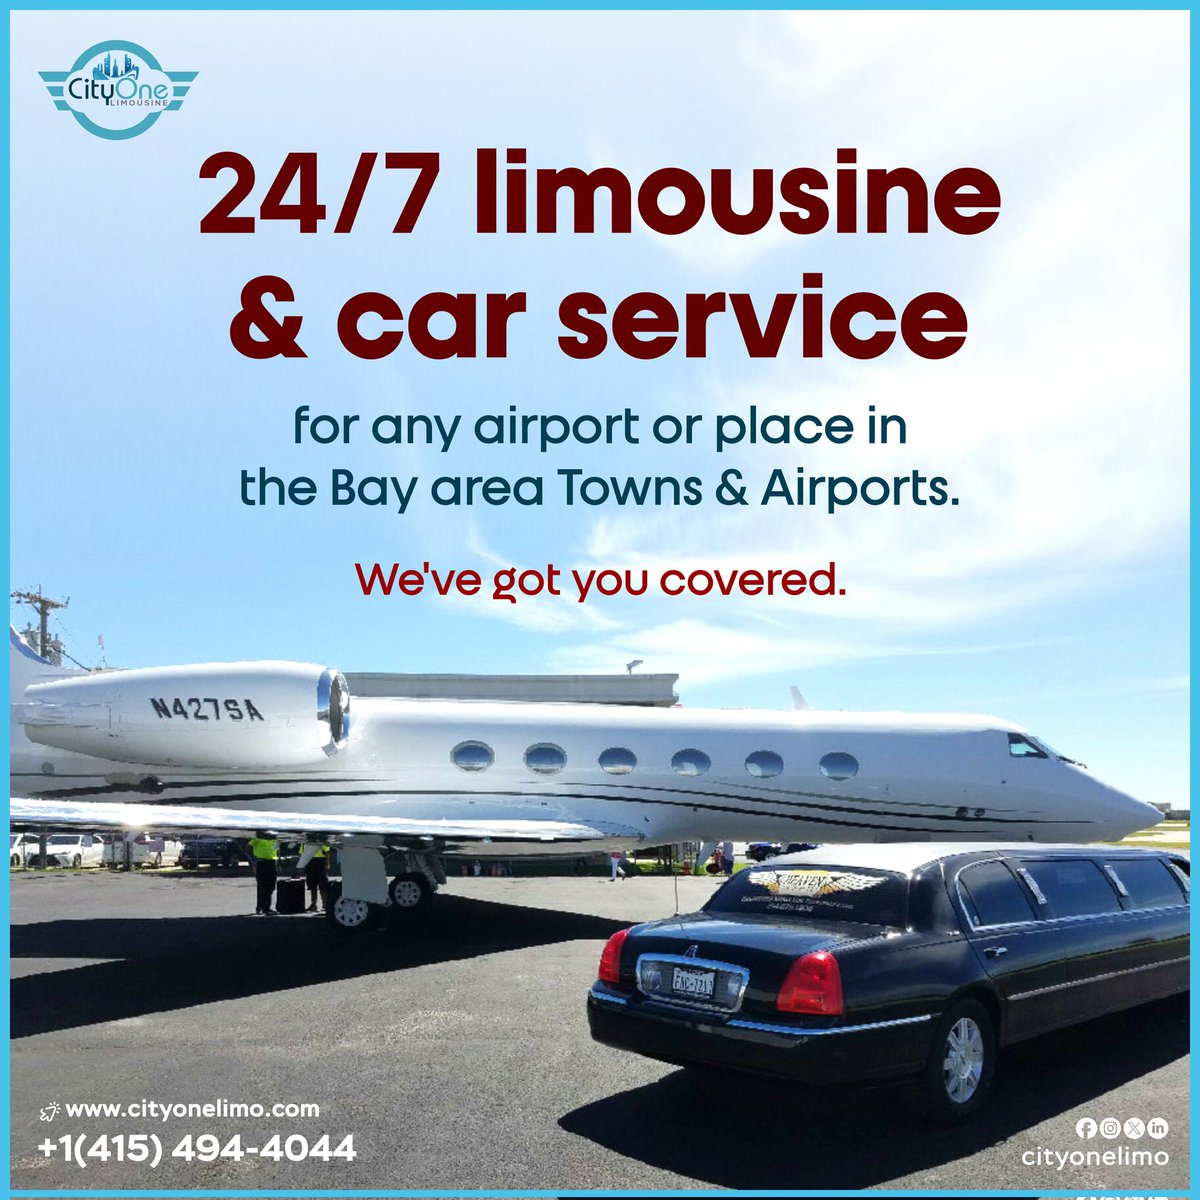 Travel hassle-free with City One Limousine! 🚗✈️ Our 24/7 service ensures you arrive in style to any Bay Area destination or airport.

 Book now at cityonelimo.com or call us at +1 (415) 494-4044. Your ride awaits! 

#BayAreaTravel #LimousineService #CityOneLimo